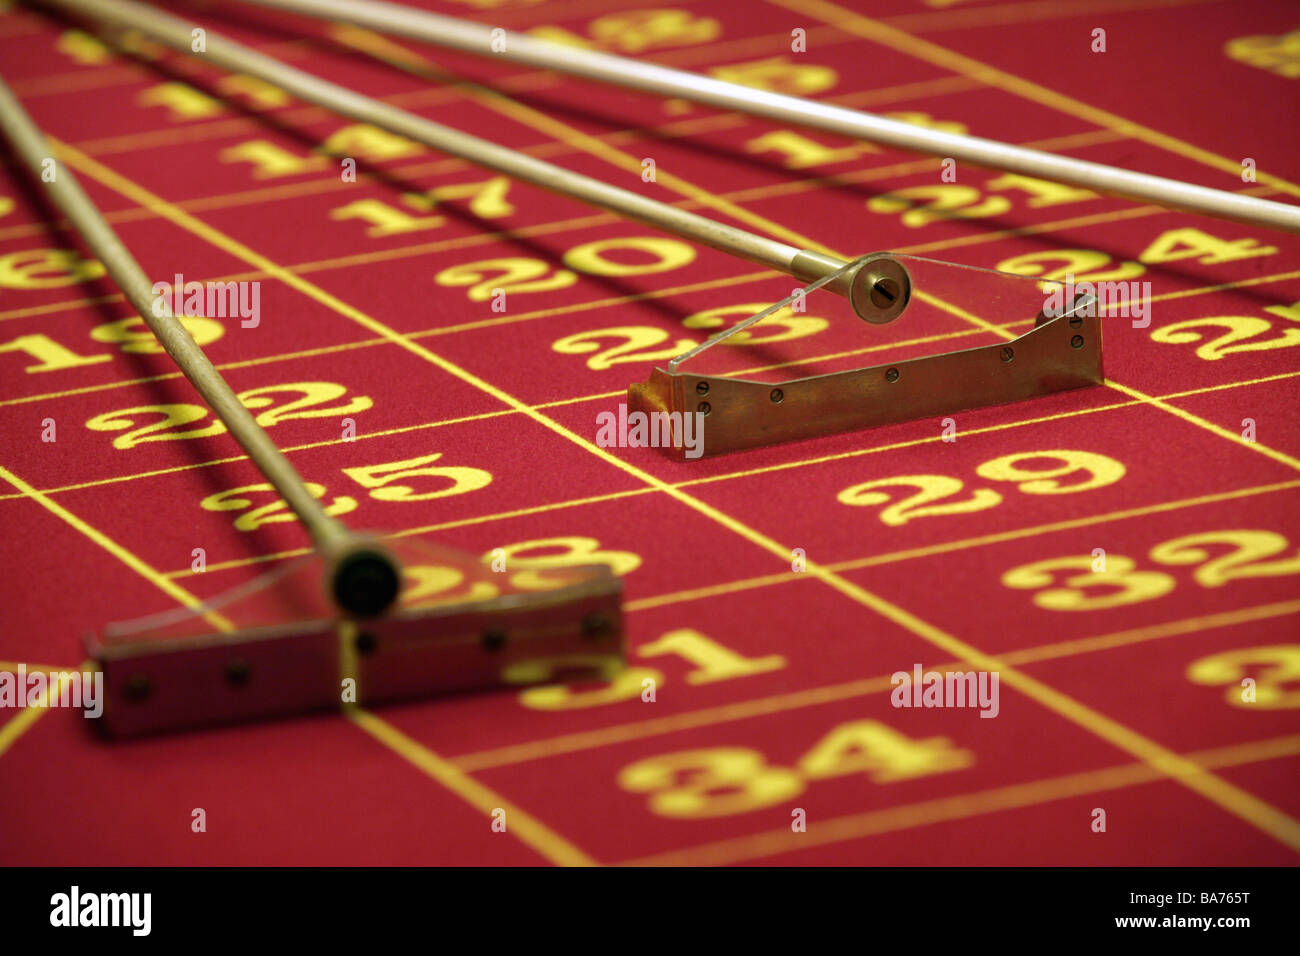 Casino gamble roulette card table installment-end detail detail fields is successful gamble casino numbers numbers Stock Photo